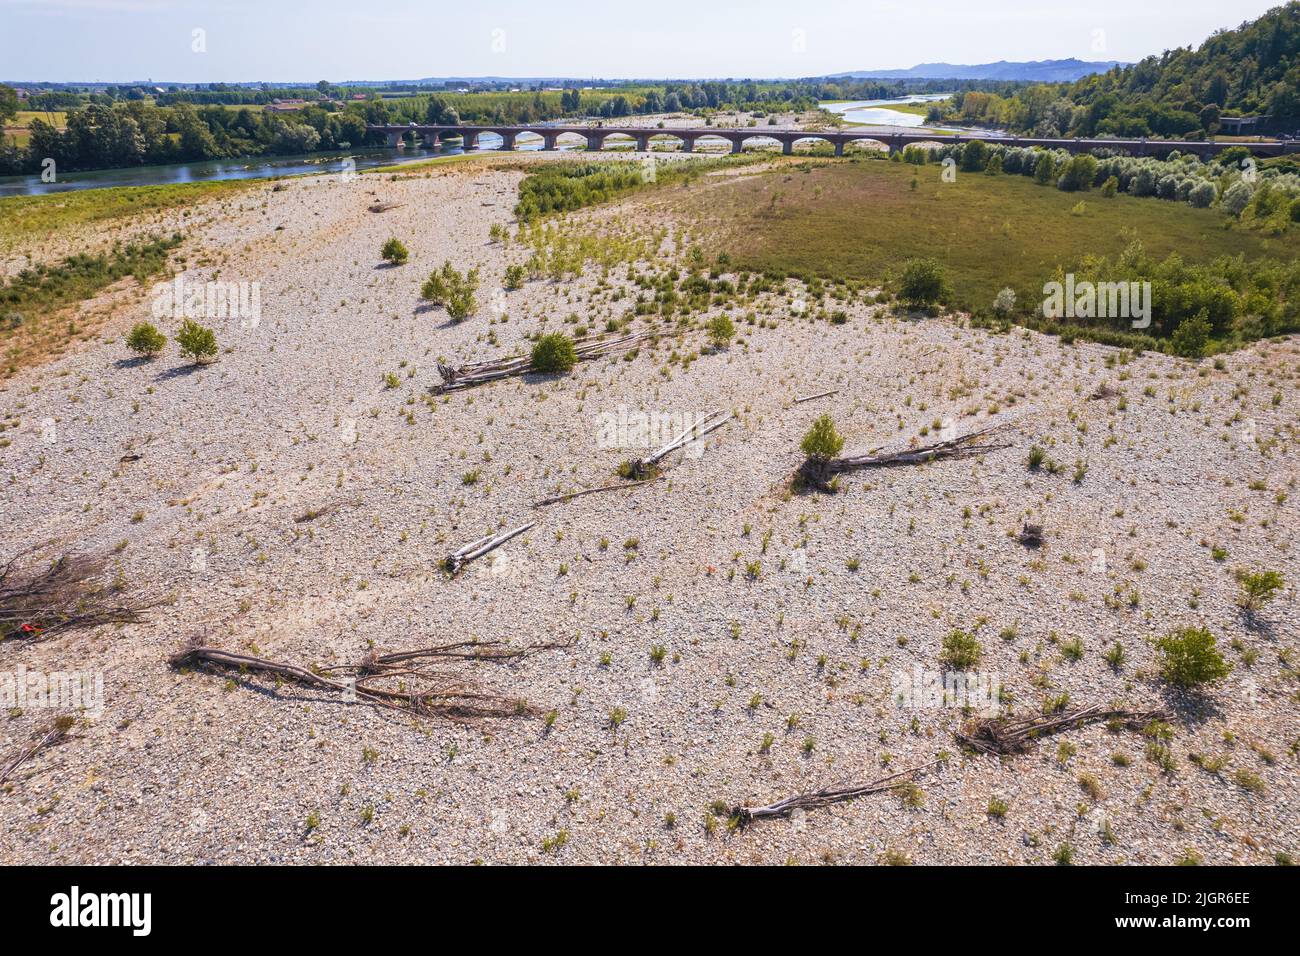 Unprecedented drought in the Po River due to long lack of rainfall. Verrua Savoia, Italy - July 2022 Stock Photo